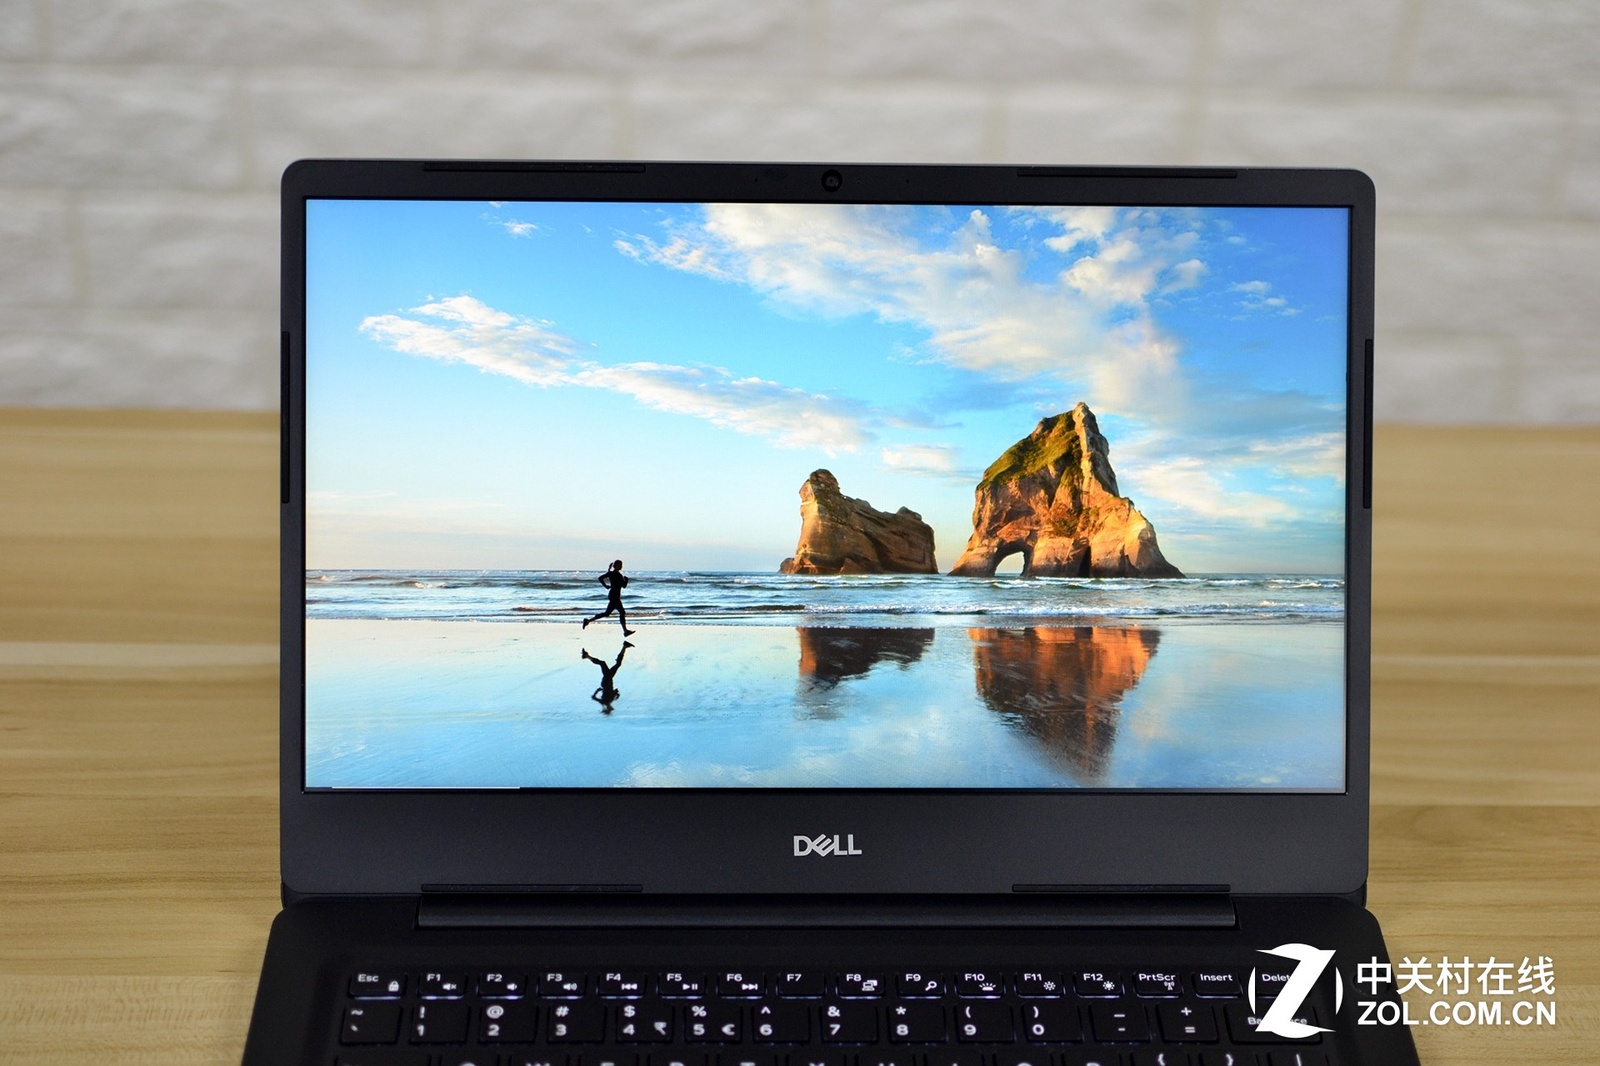 Dell Vostro 5481 laptop review - Dell, , Ultrabook, Notebook, Longpost